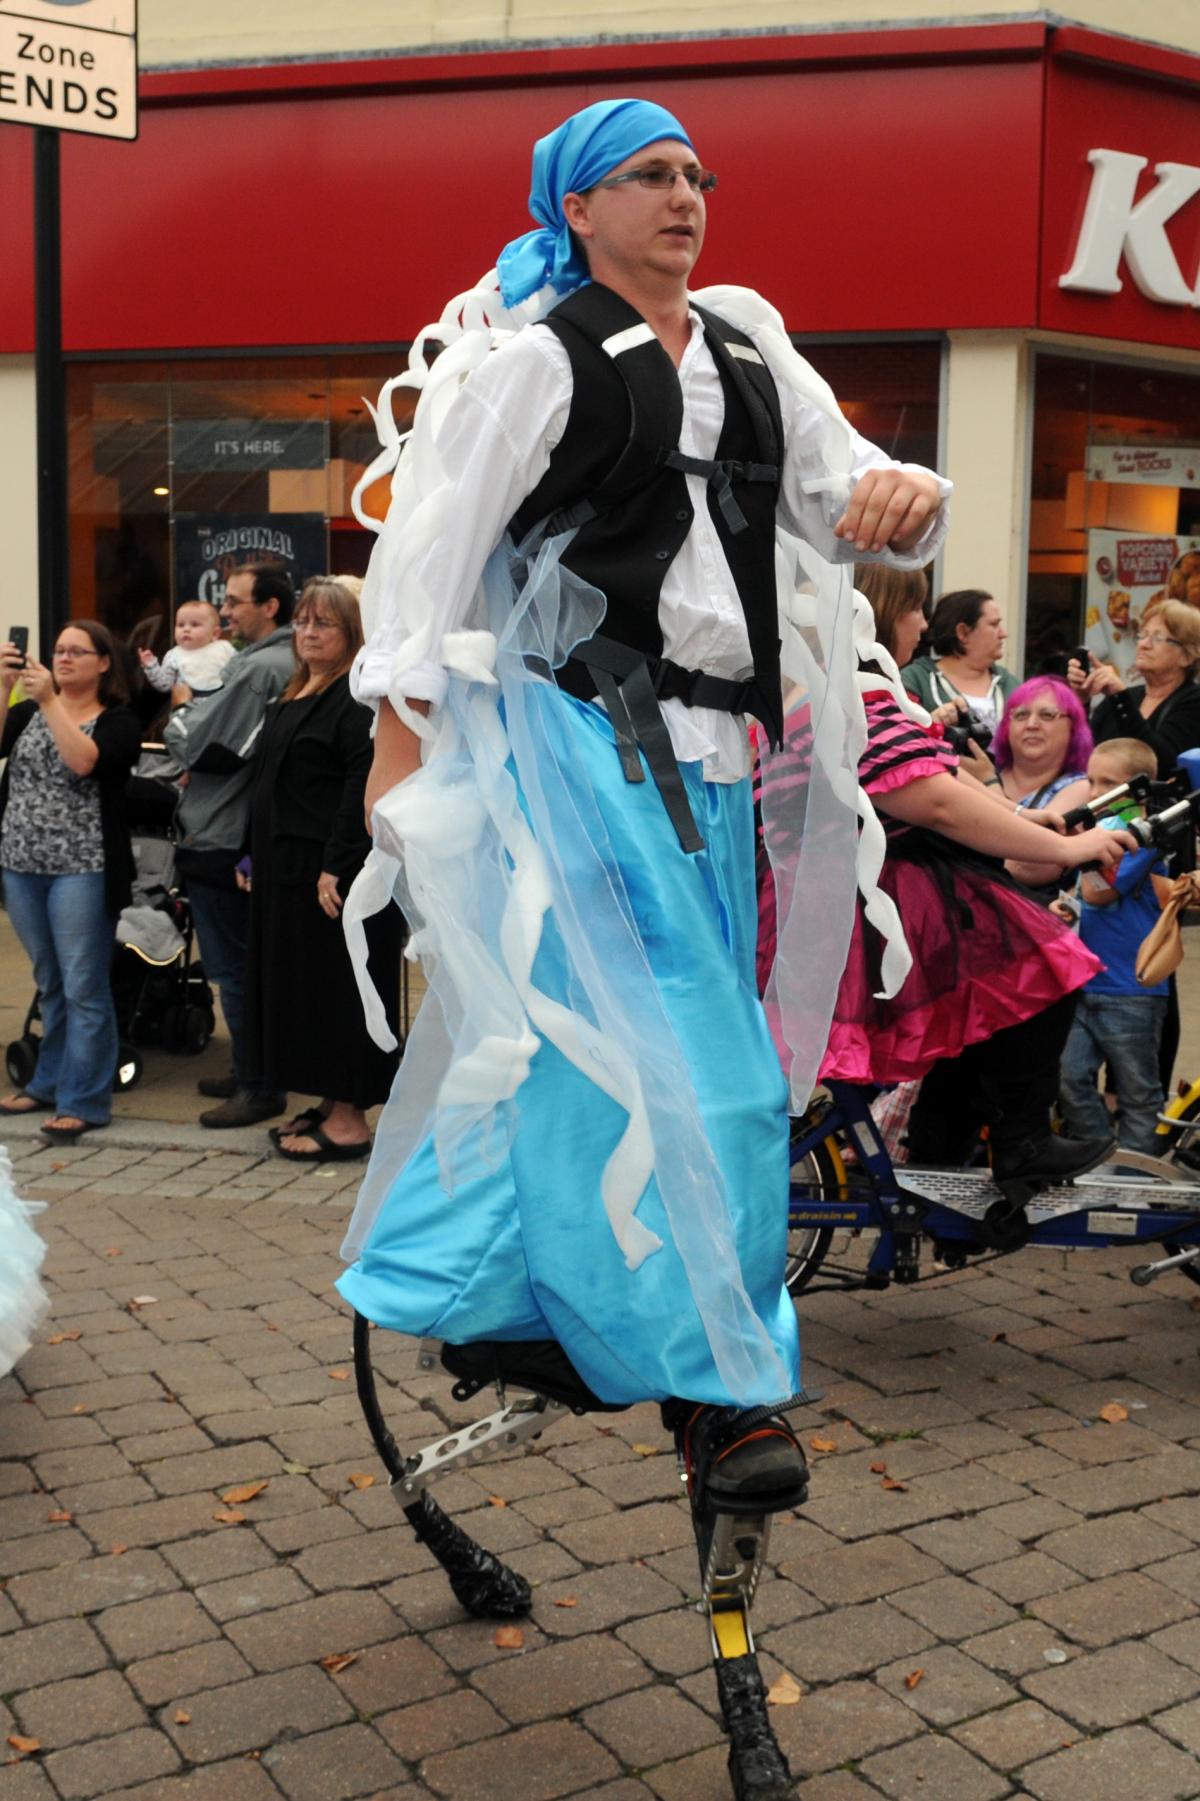 Pictures from the Eastleigh Mardi Gras 2014.